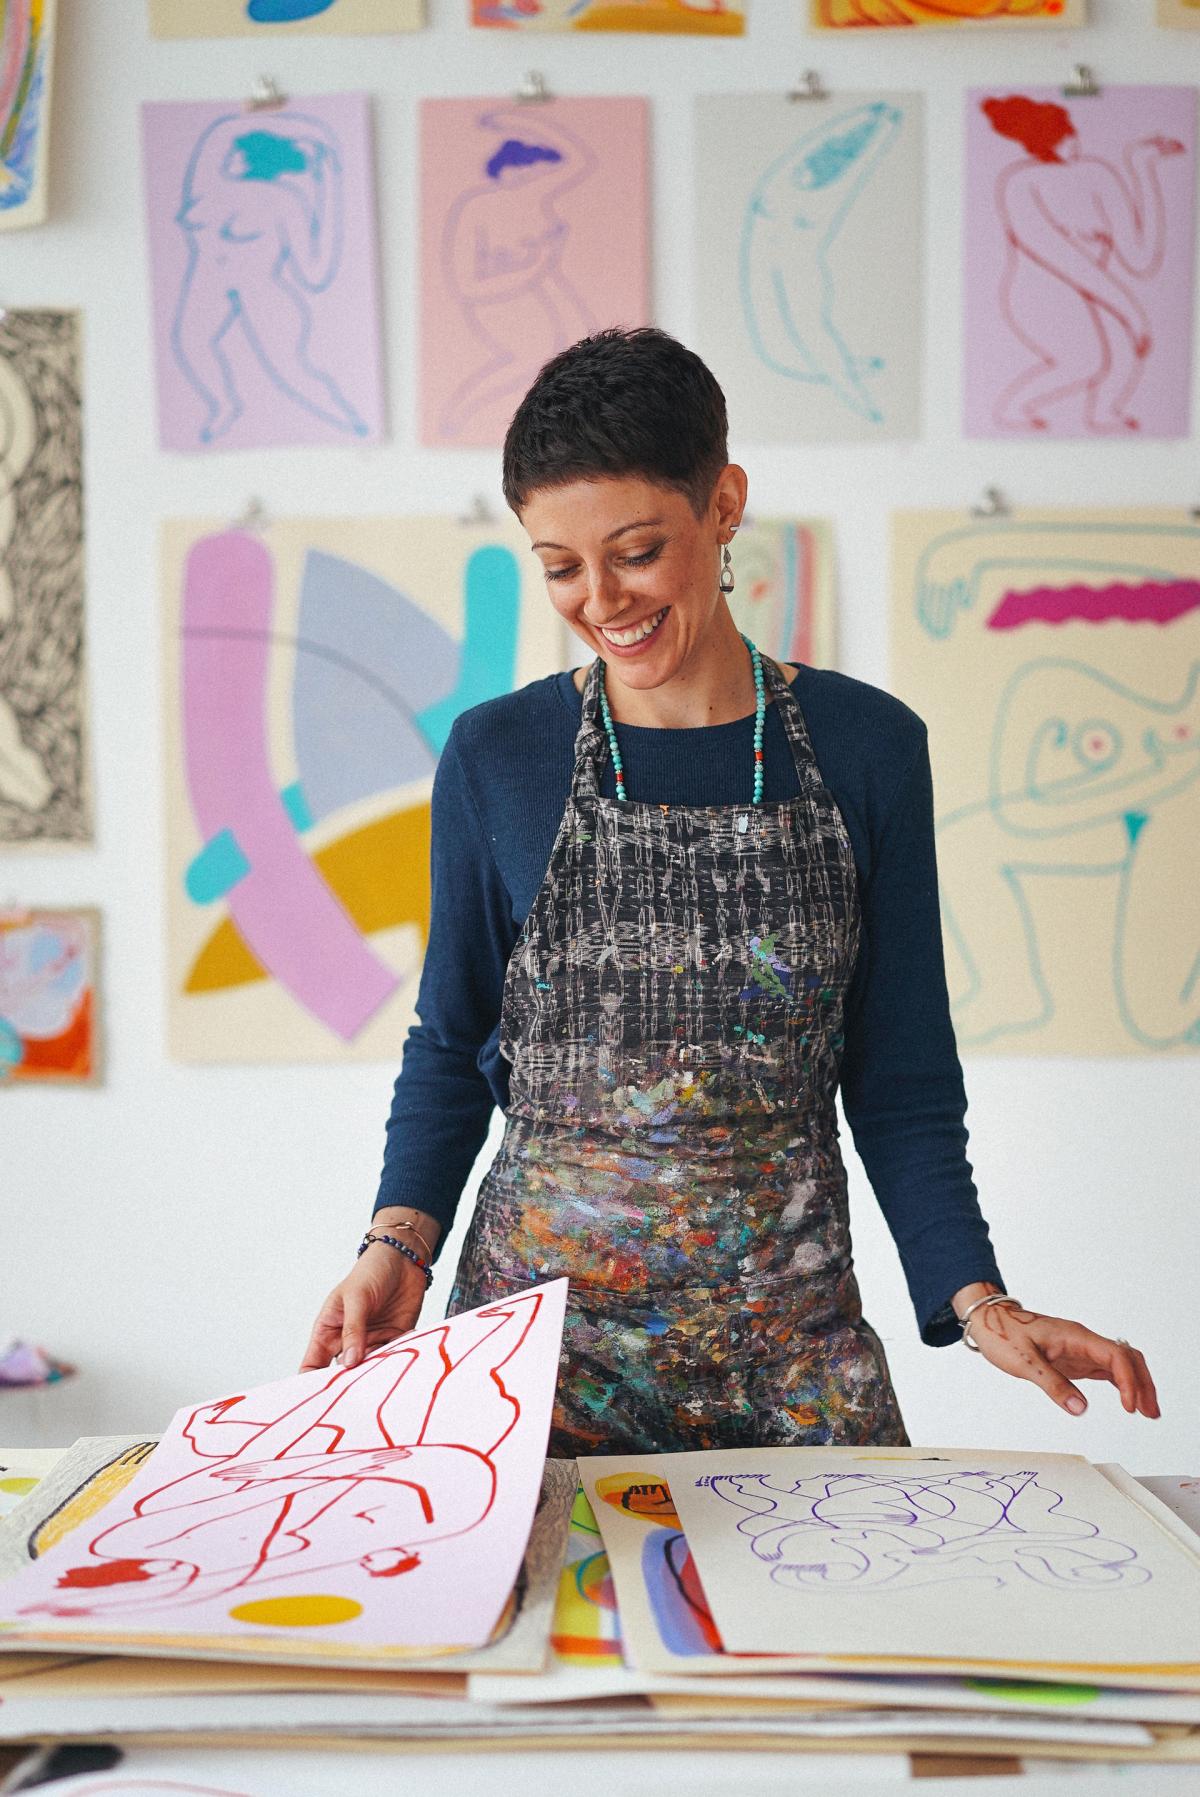 Photograph of a smiling woman standing in a print studio surrounded by colorful prints